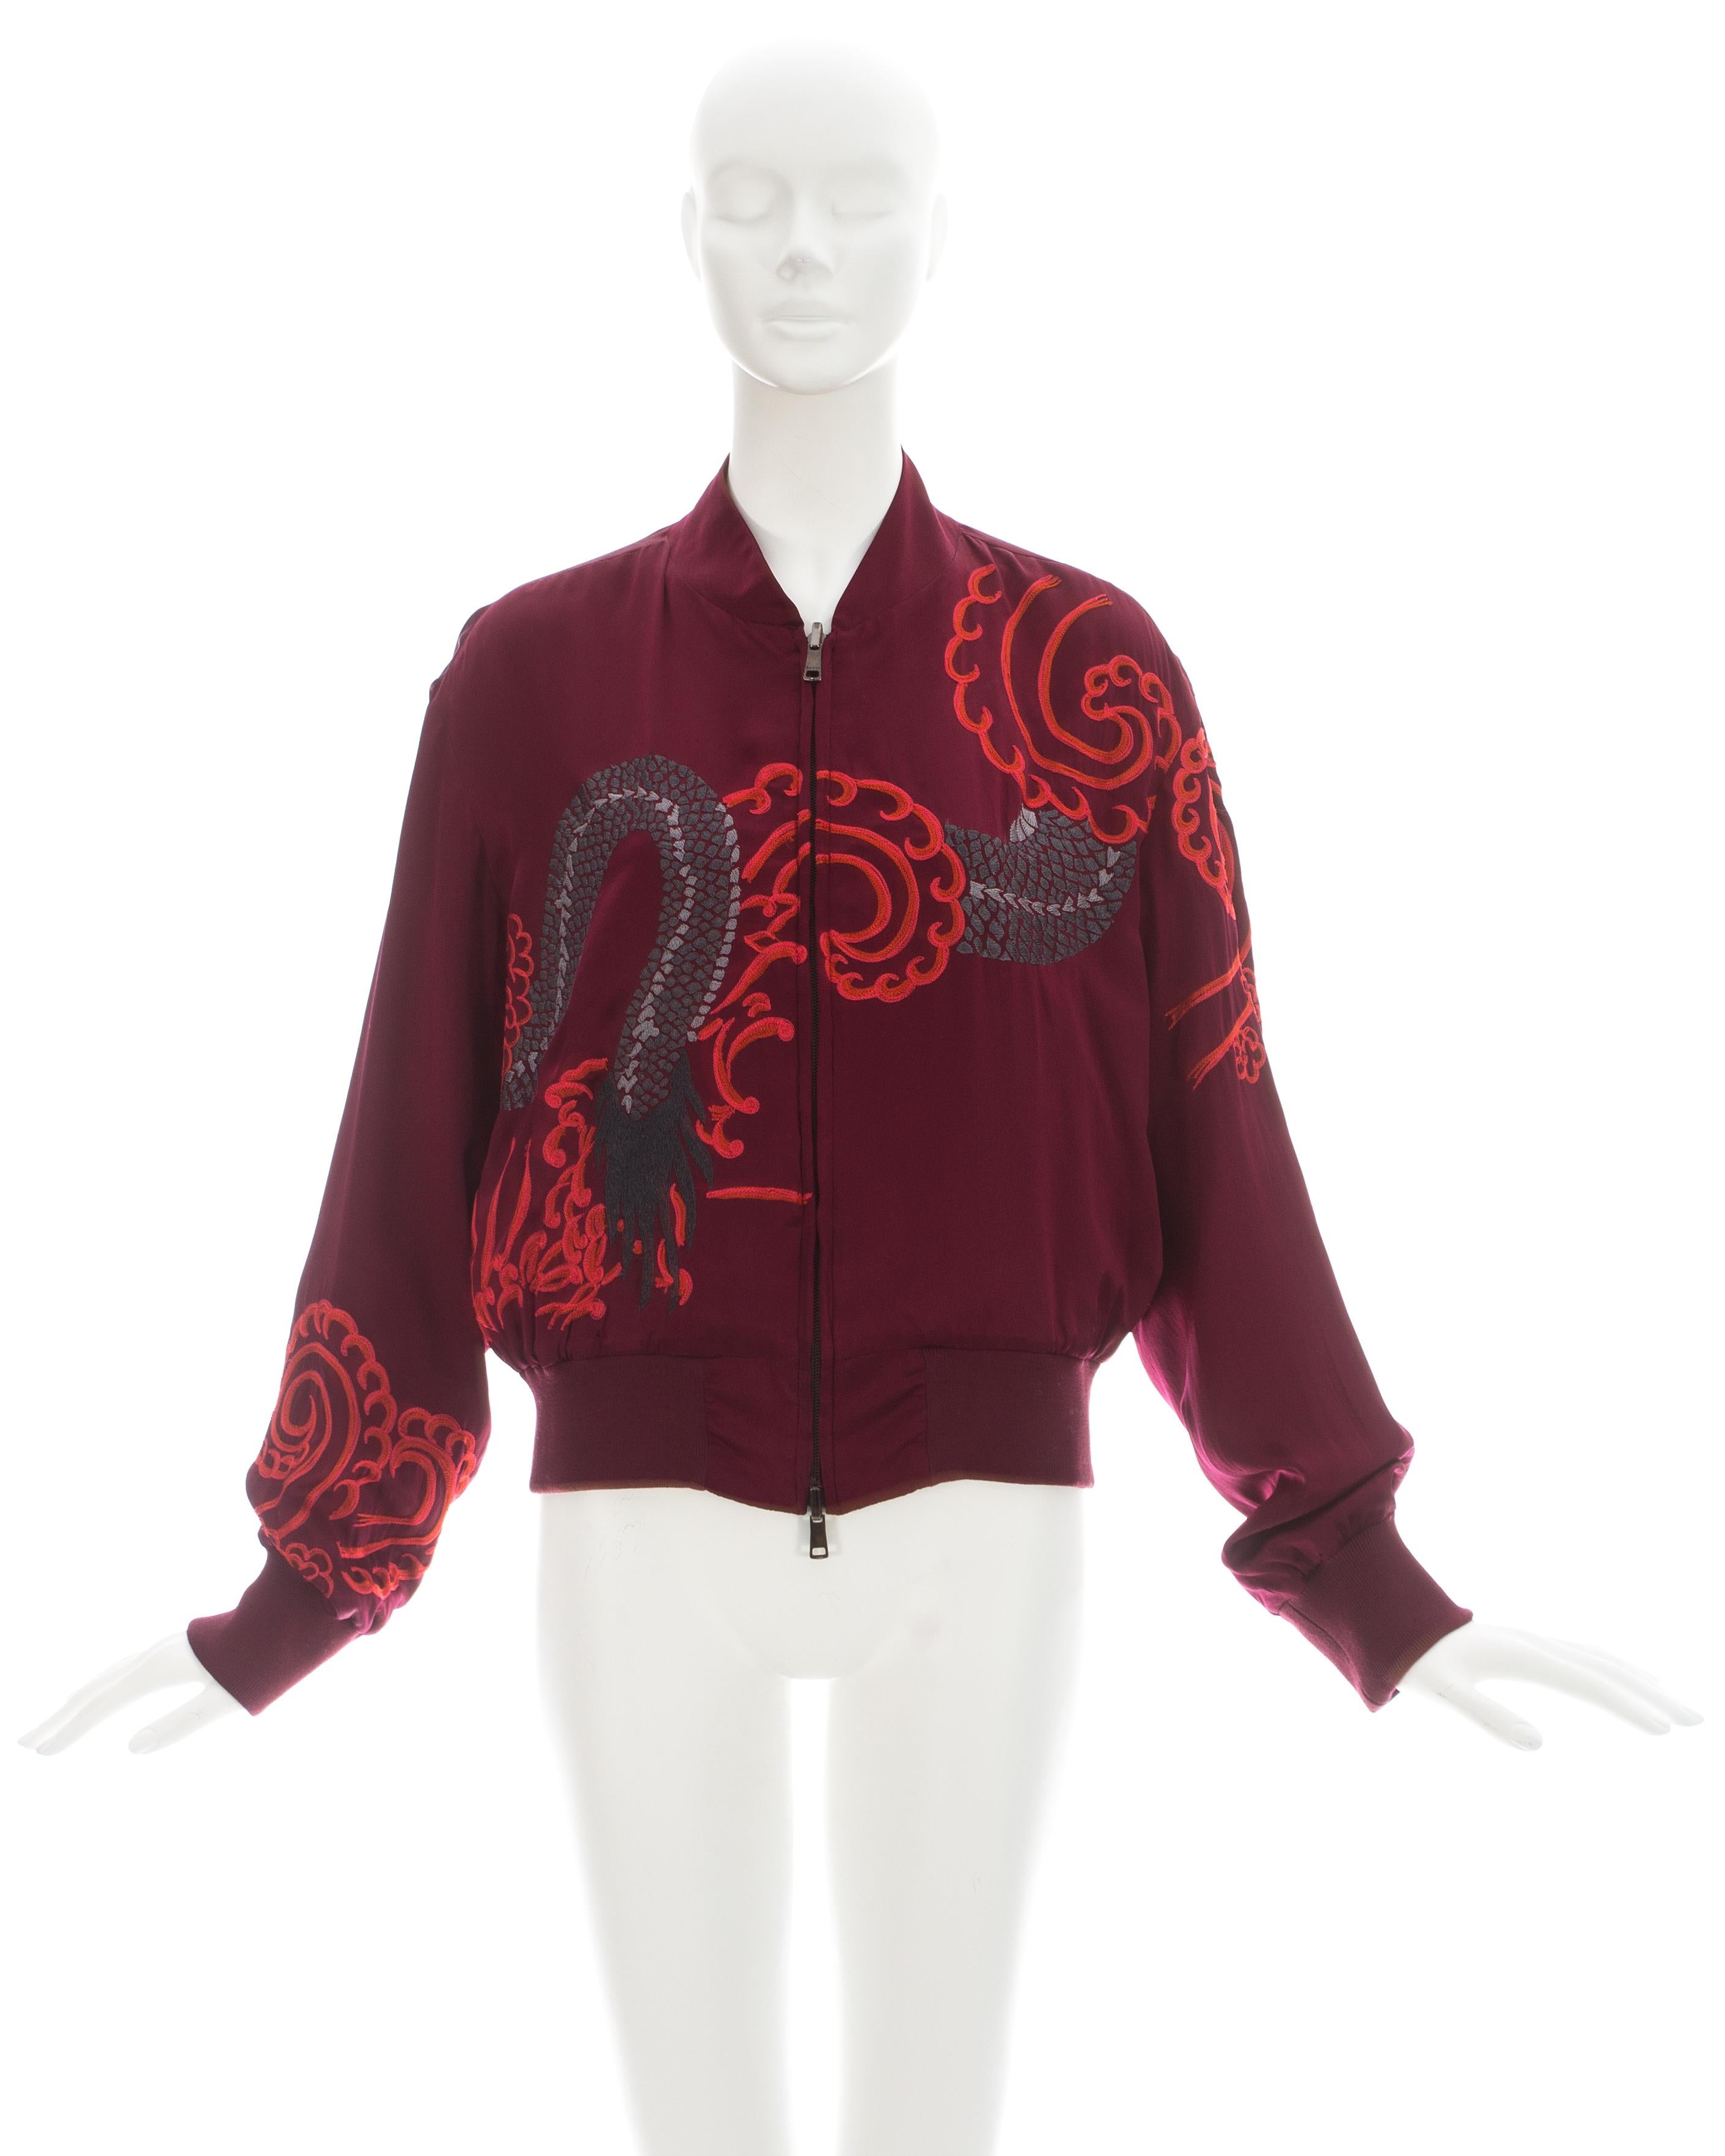 Gucci by Tom Ford; Red silk reversible bomber jacket; one side with dragon embroidery and the other plain

Spring-Summer 2001